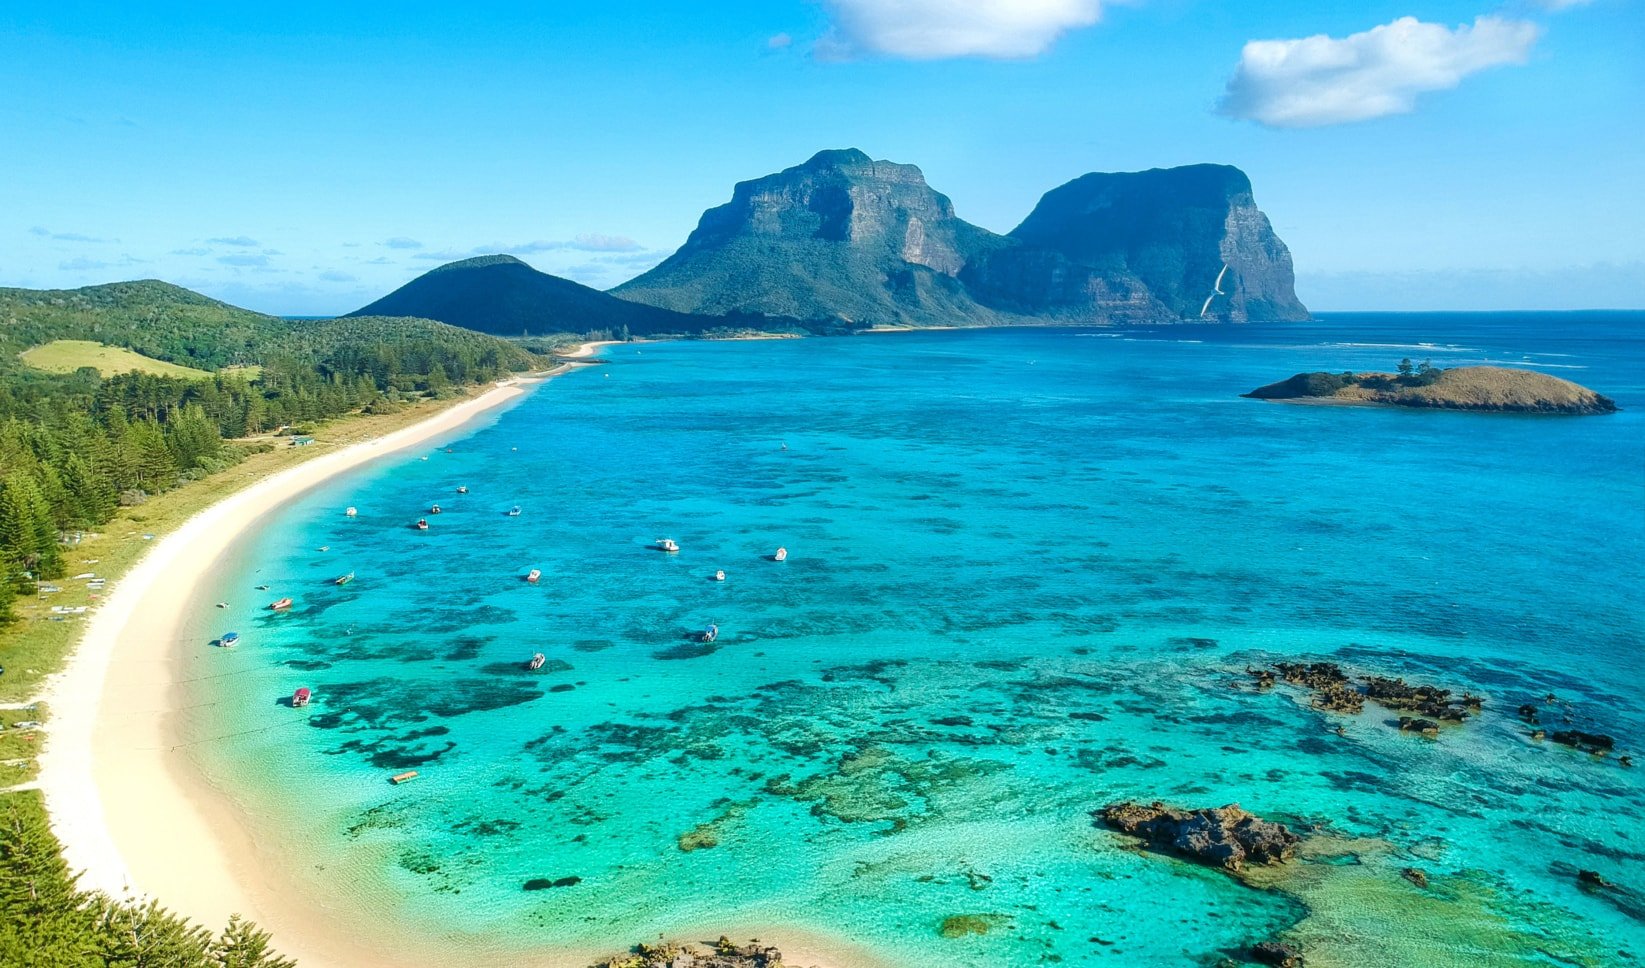 10 magnificent photographs of Lord Howe Island - Australian Geographic